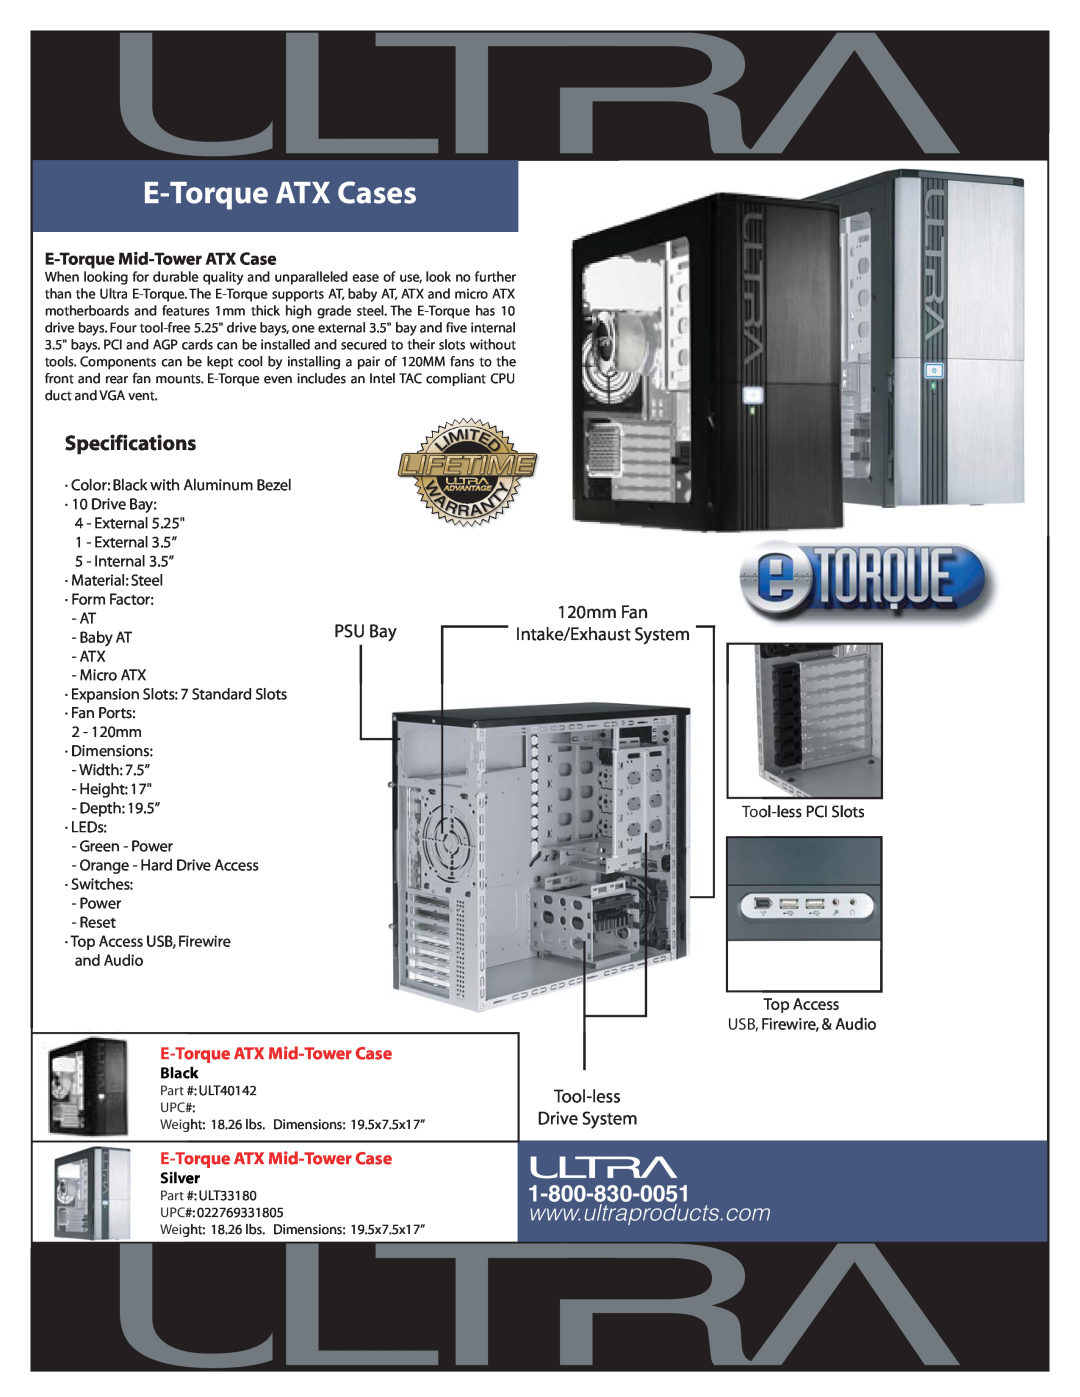 Ultra Products specifications E-Torque ATX Cases, Specifications, 120mm Fan Intake/Exhaust System, · Form Factor - AT 